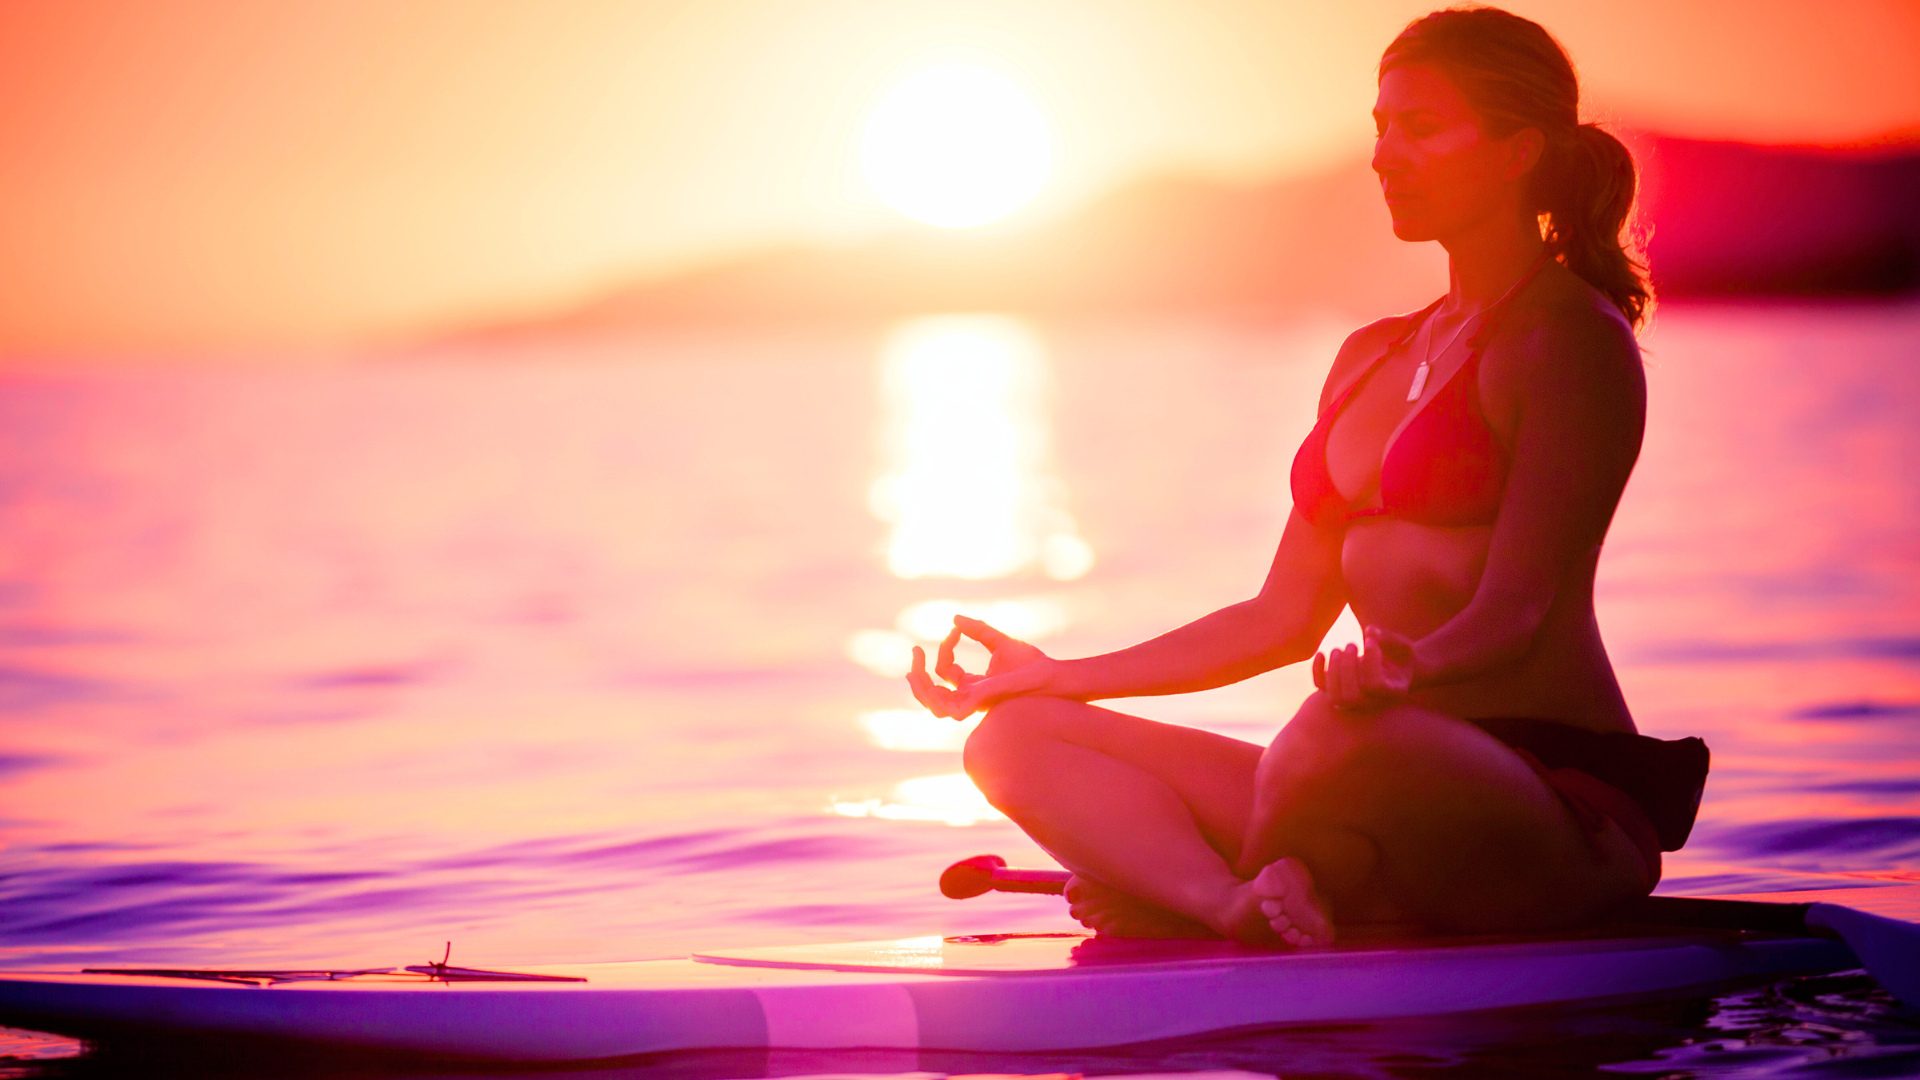 Woman on paddleboard meditating on water at sunset